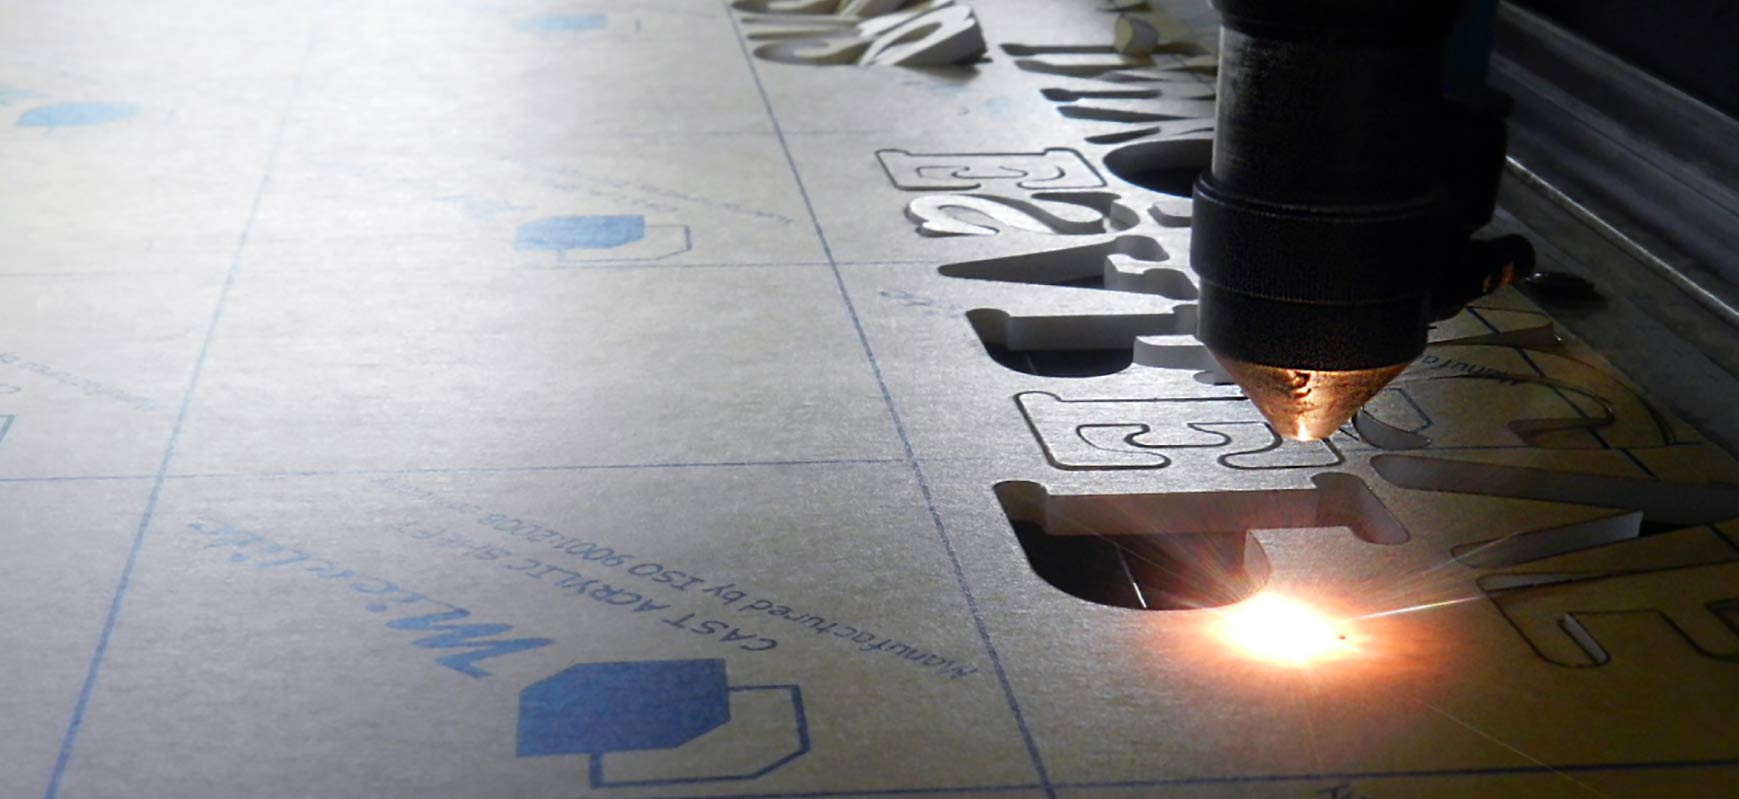 Acrylic laser cutting process for precise cut-outs while providing clear and clean-cut edges